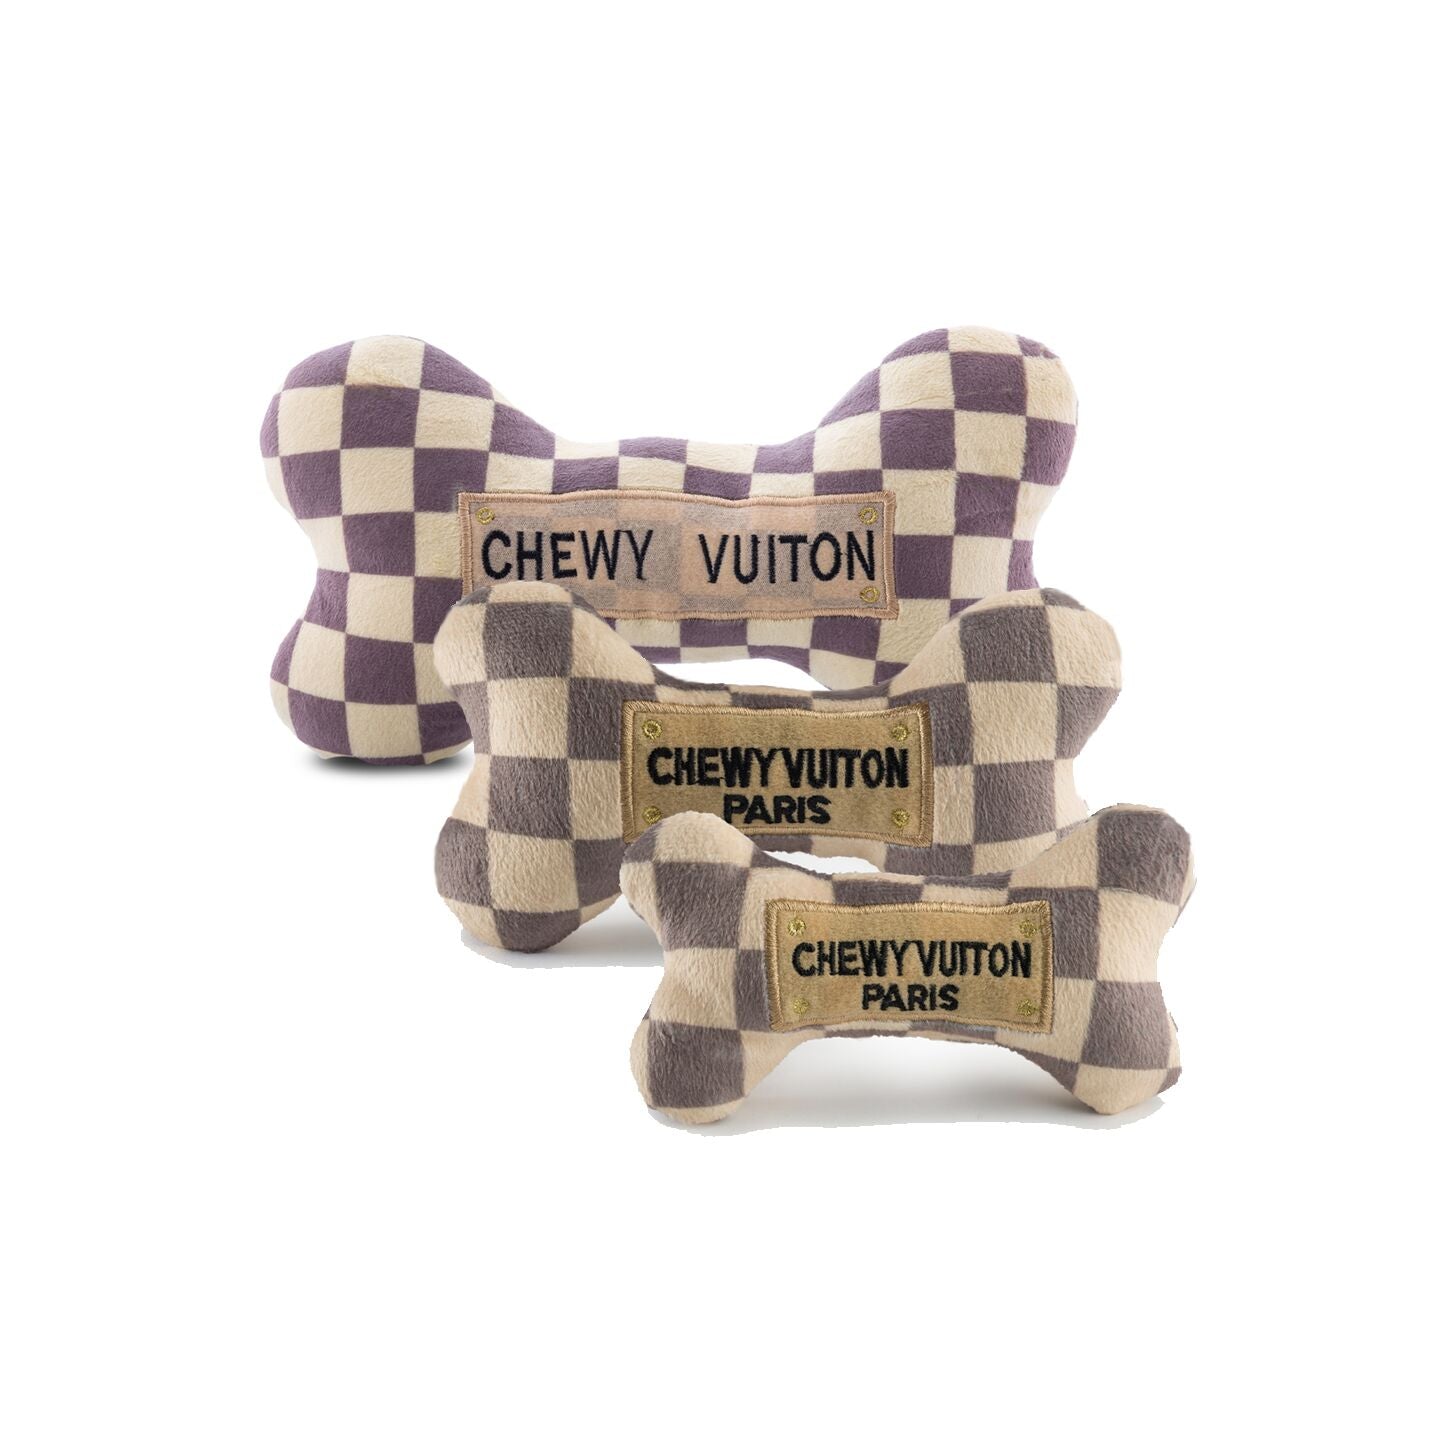 Chewy Vuiton Trunk Activity House Dog Toy  Cute dog toys, Interactive dog  toys, Plush dog toys